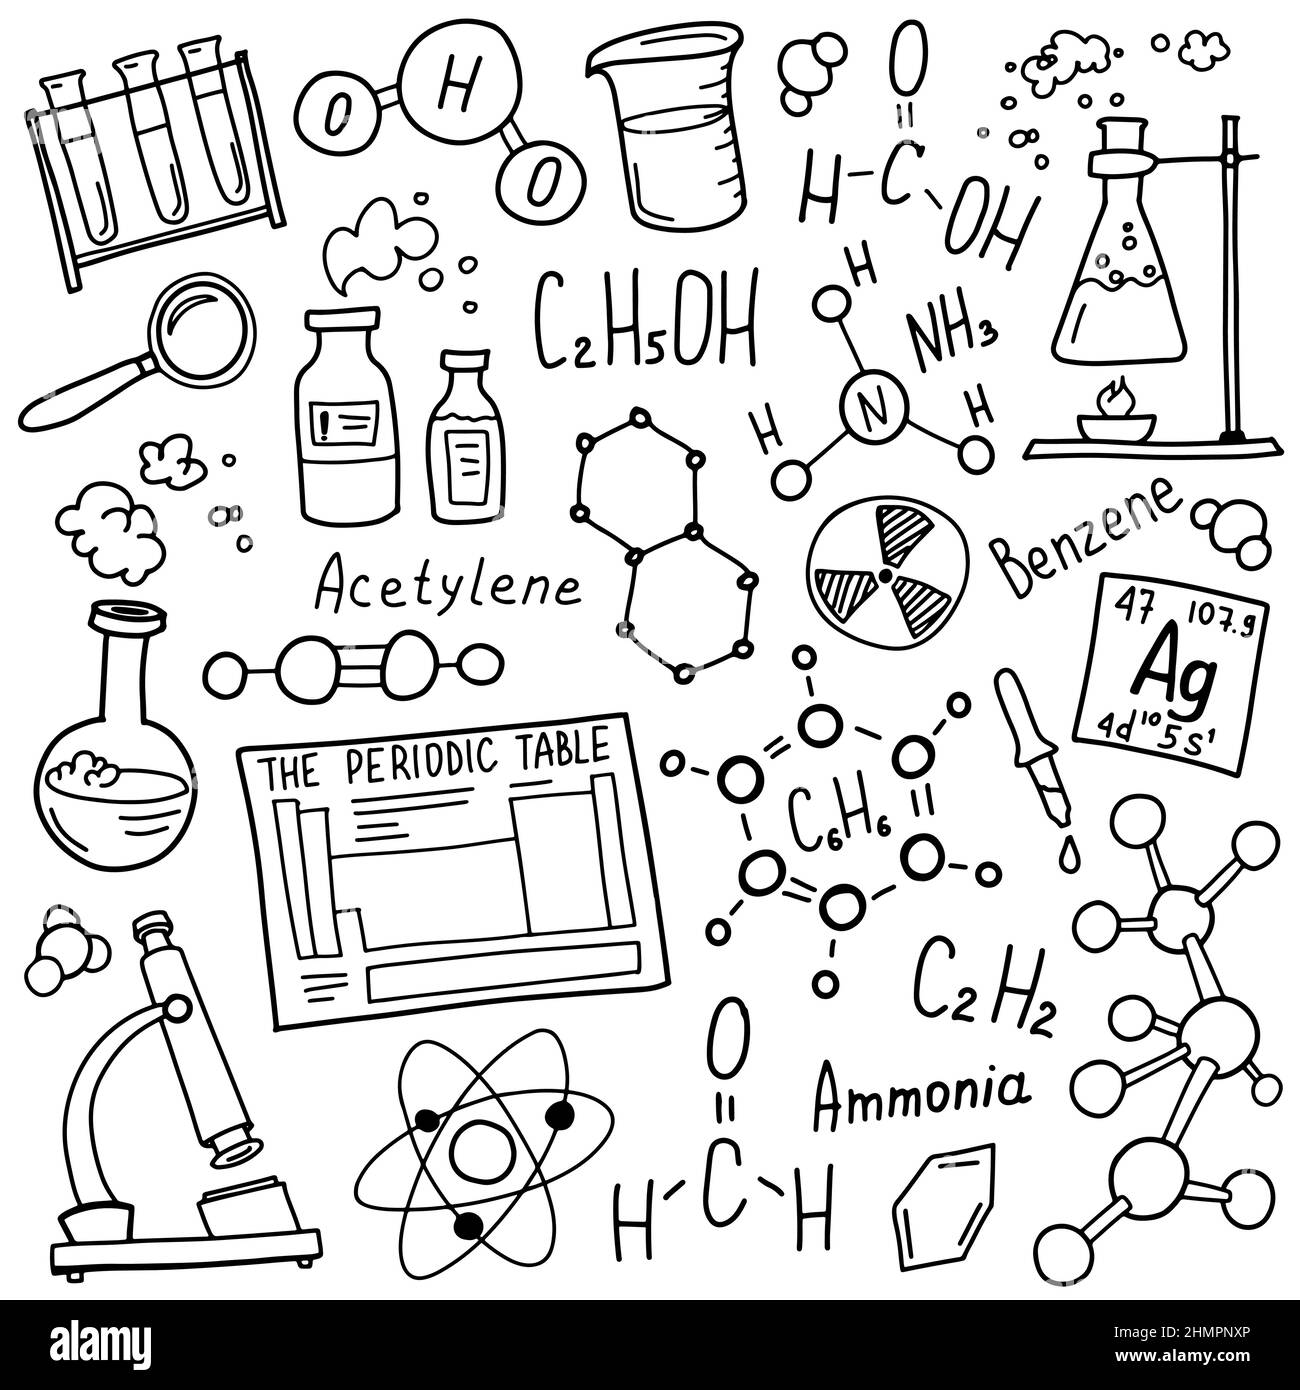 Chemistry symbols icon set. Science subject doodle design. Education and study concept. Back to school sketchy background for notebook, not pad Stock Vector